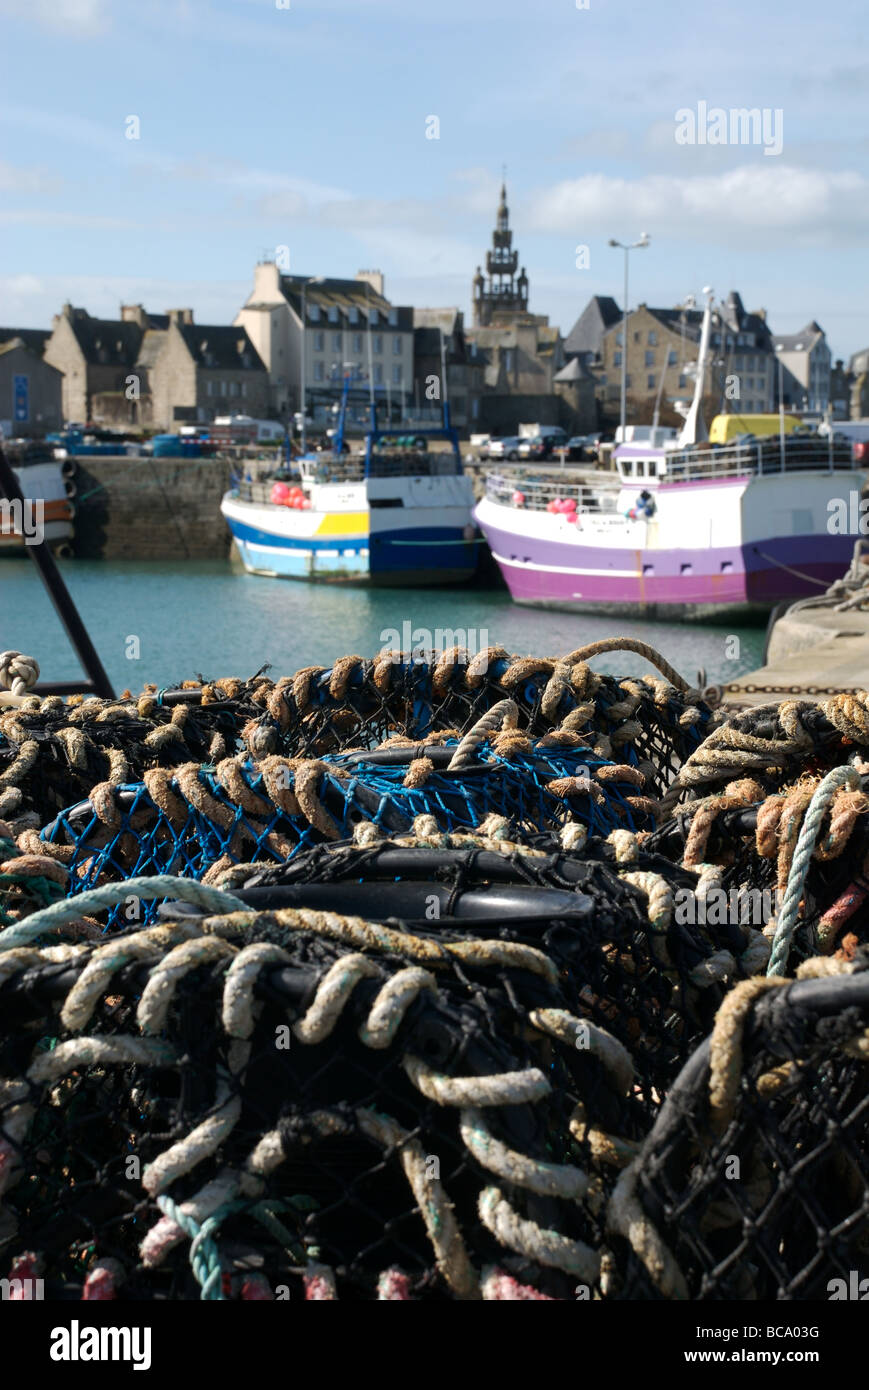 Fishing pots and colourful boats, Roscoff, Brittany, France Stock Photo